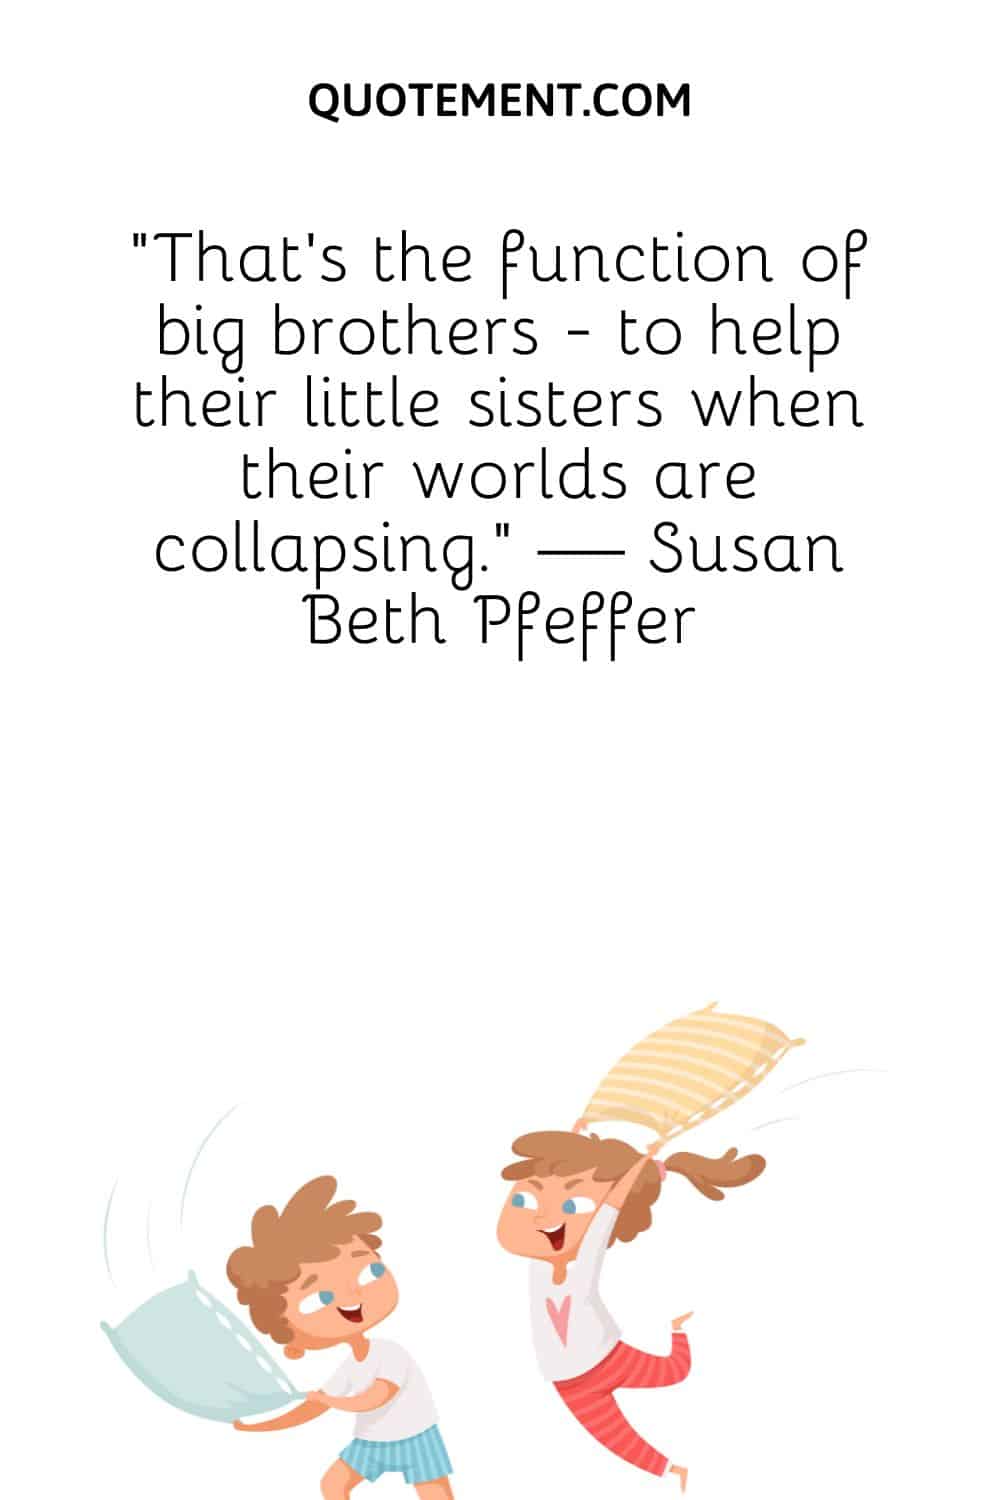 That's the function of big brothers - to help their little sisters when their worlds are collapsing